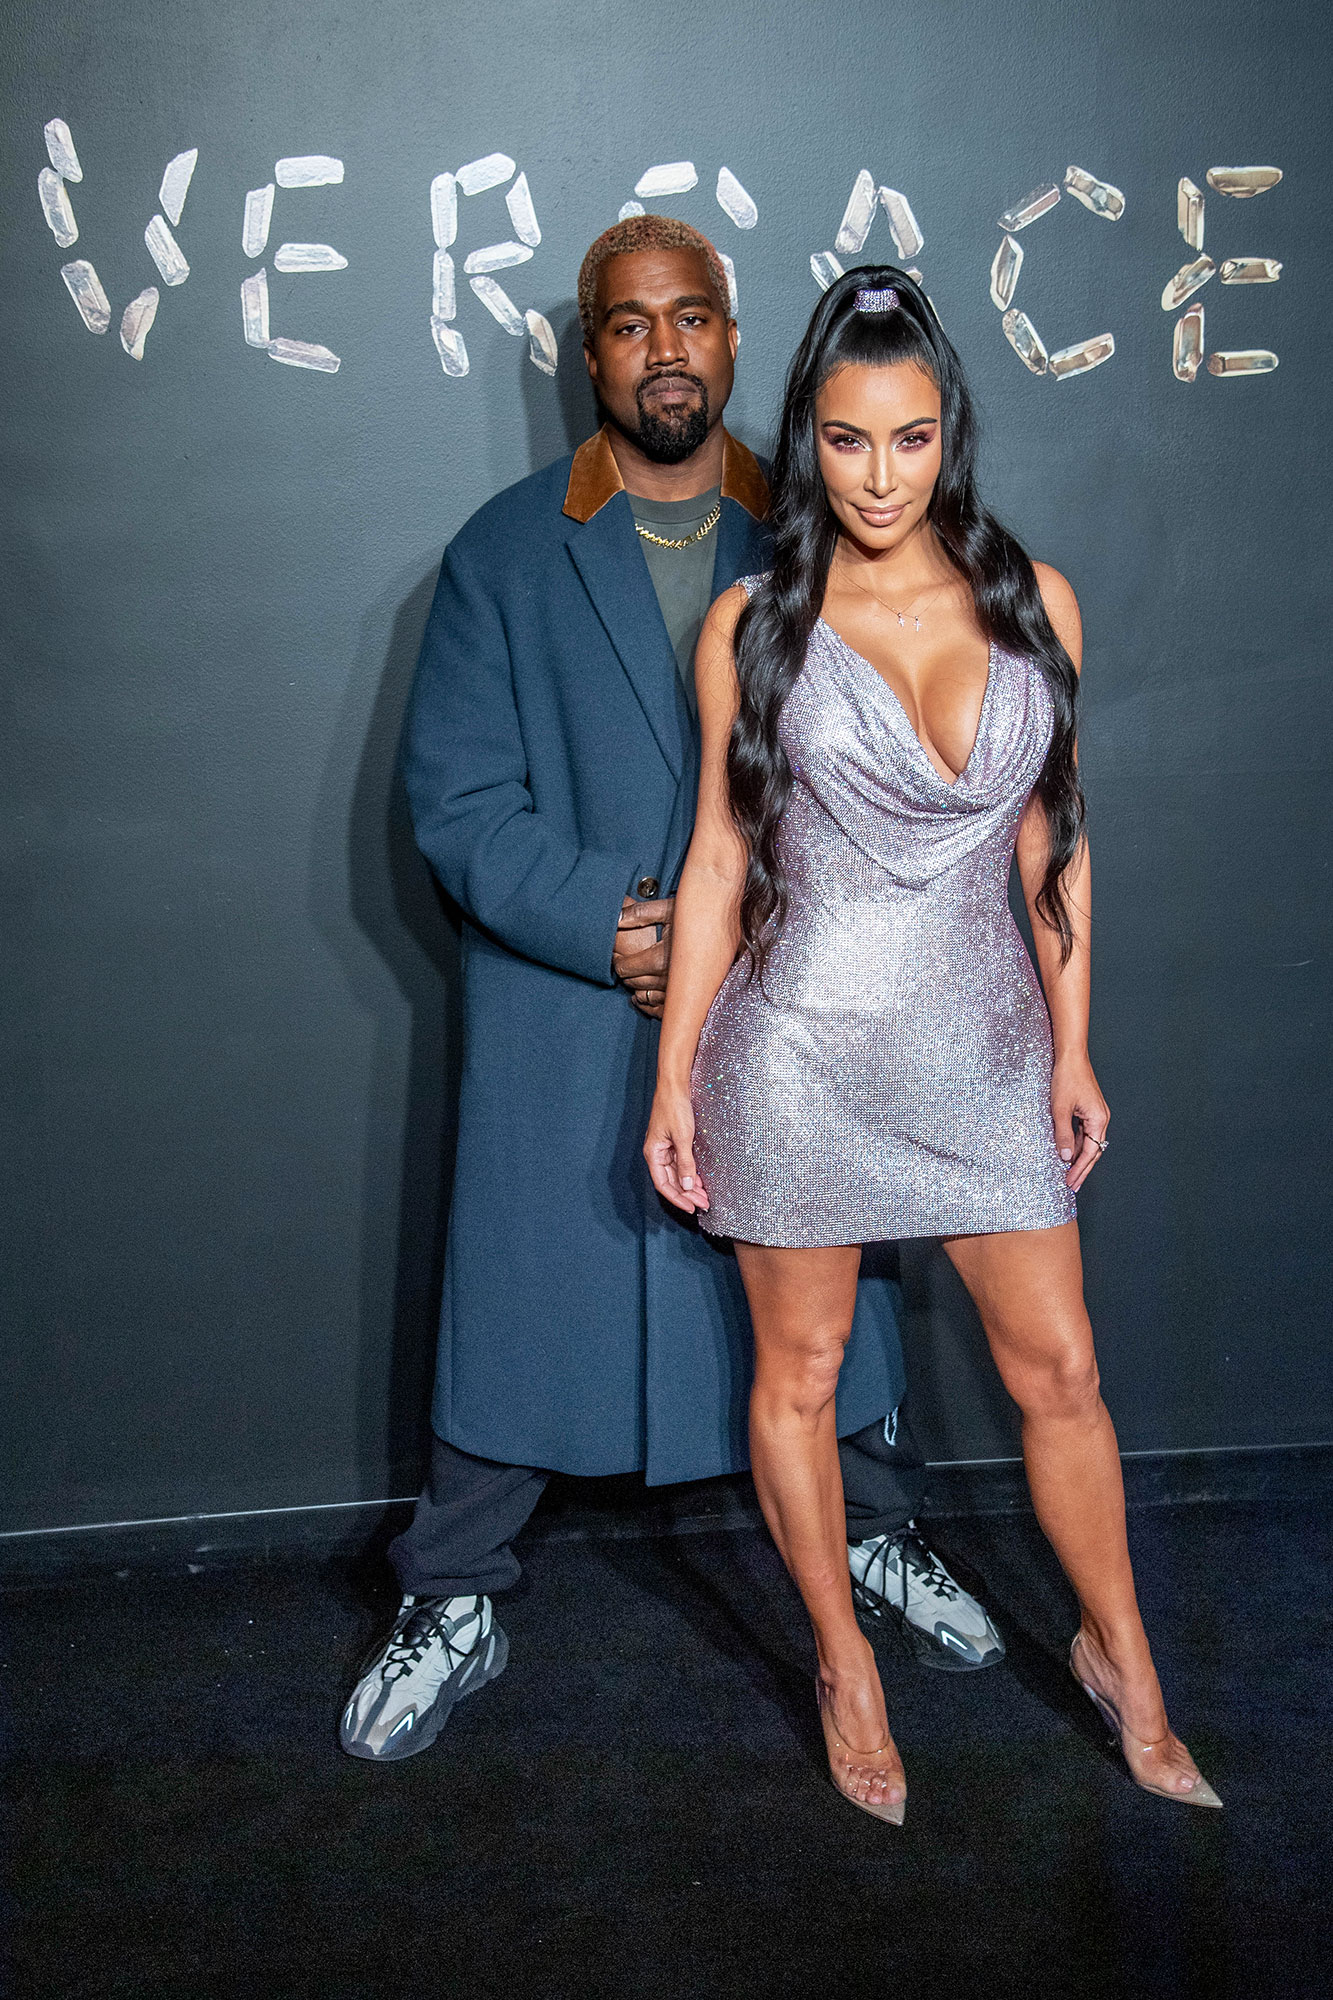 Top 10 Biggest Kardashian and Jenner Stories of 2018: Stormi’s Secret Birth, Tristan Thompson’s Cheating Scandal and More